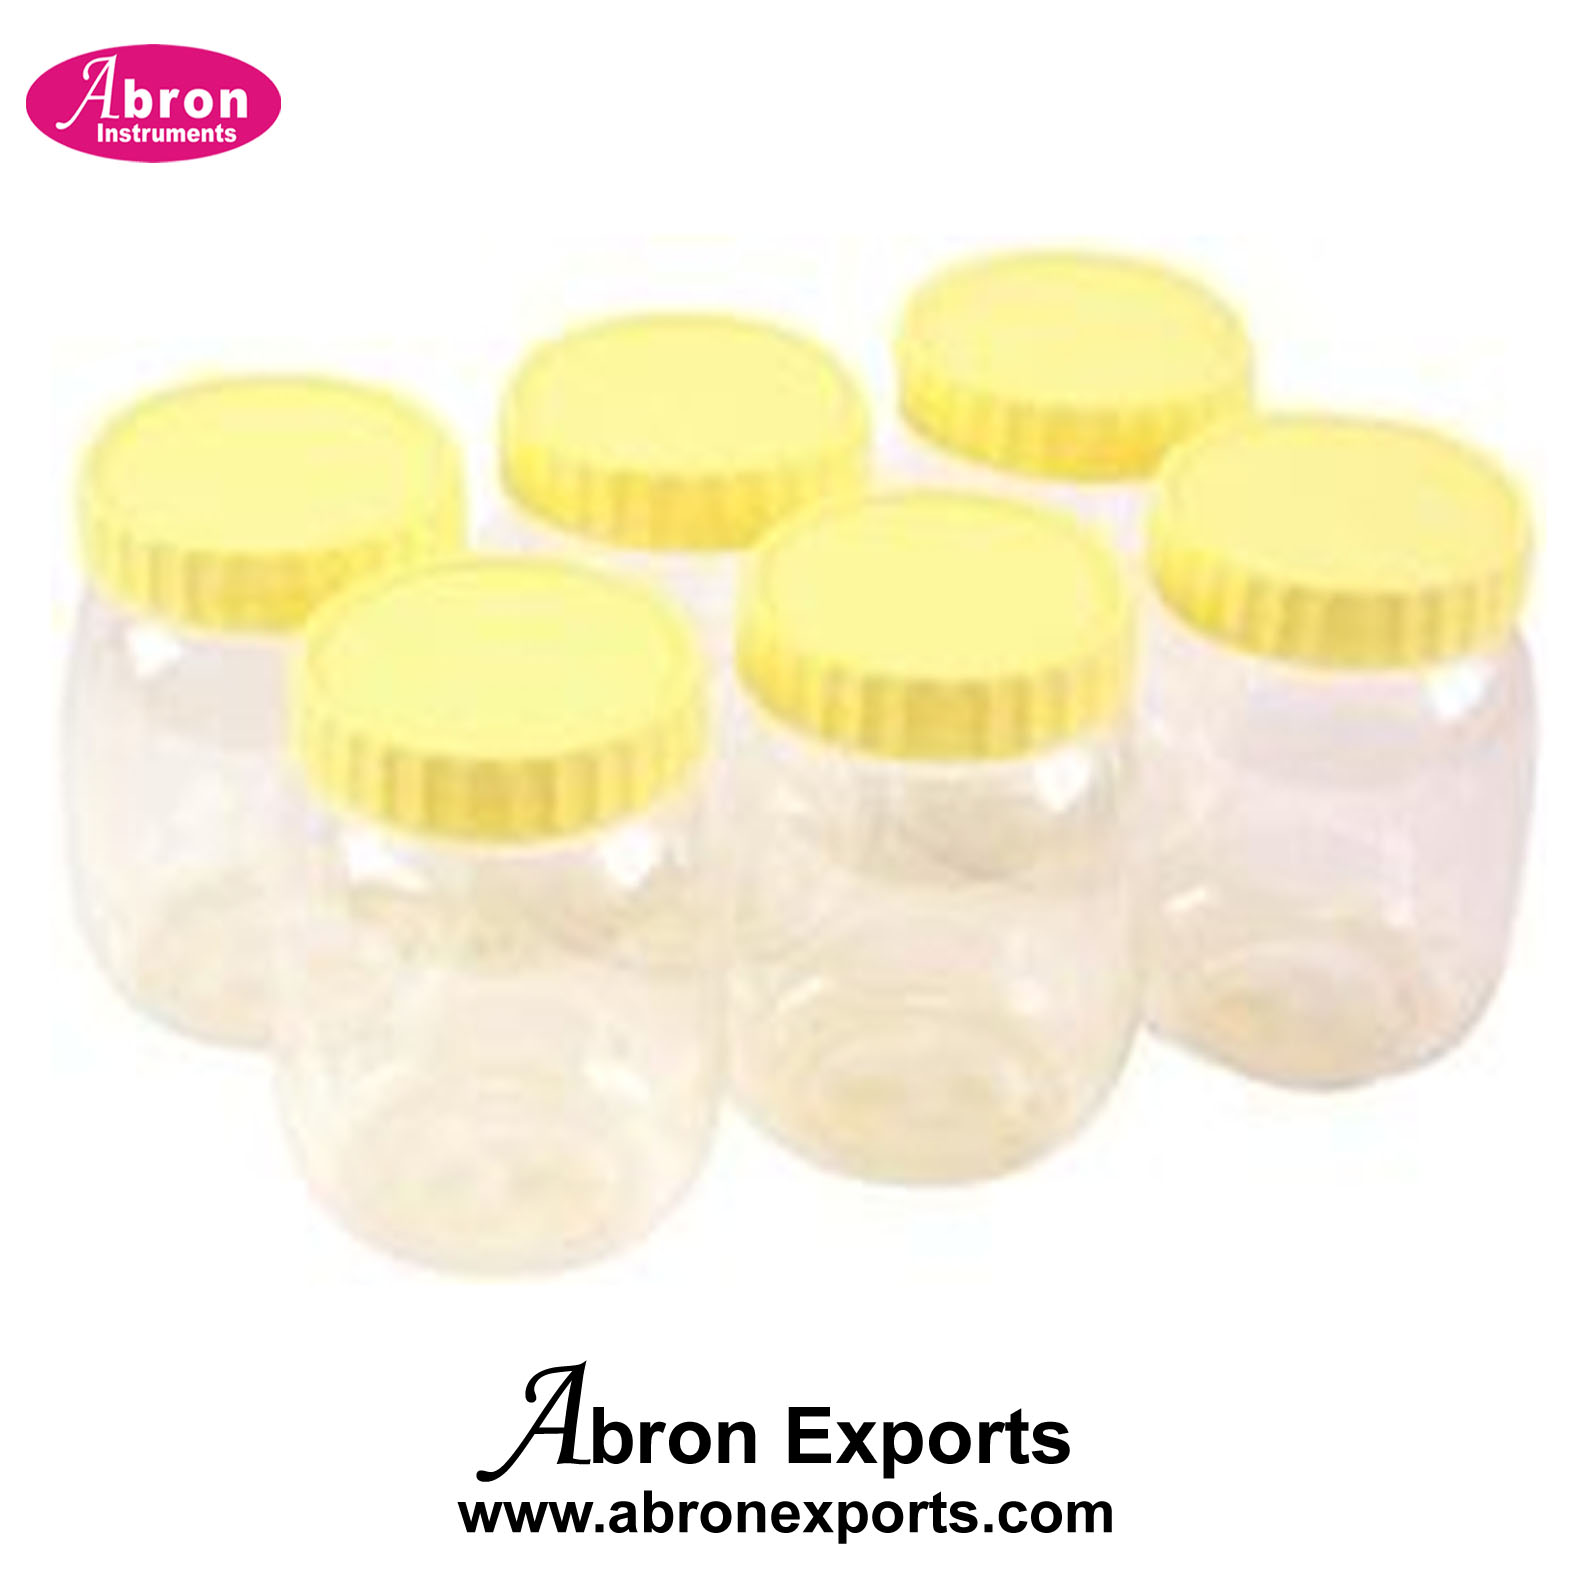 Honey Packing Wide Mouth Jar 250gm 500gm Abron AT-9516-250